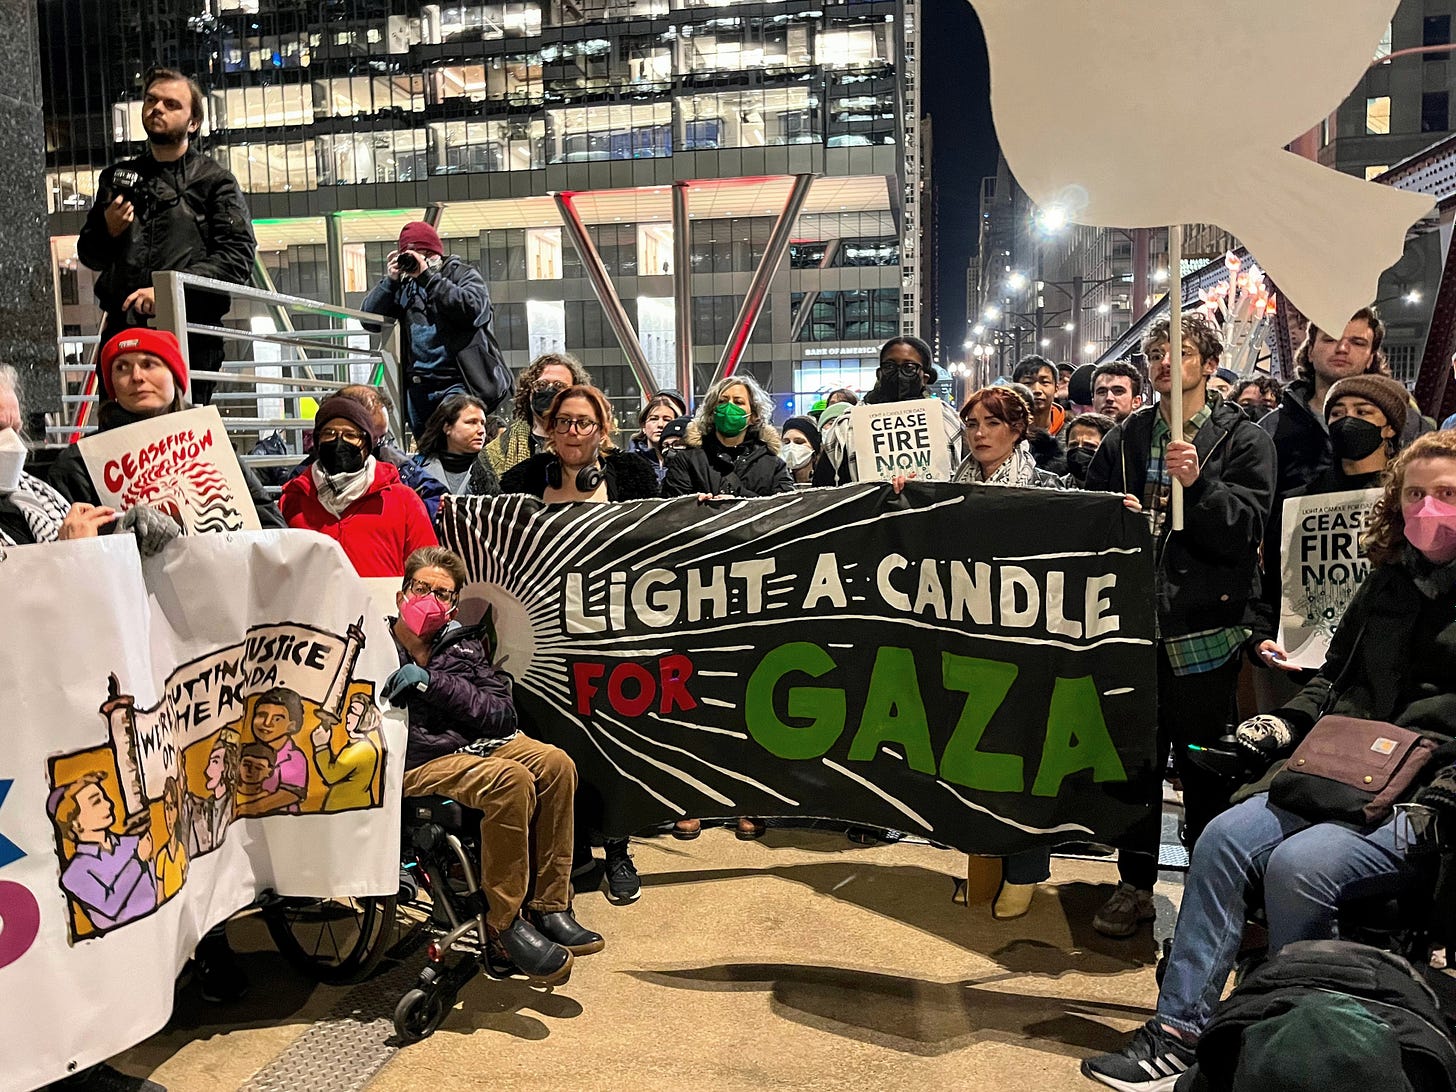 Protesters hold a banner that reads "Light a Candle for Gaza) outside the Boeing building in Chicago.